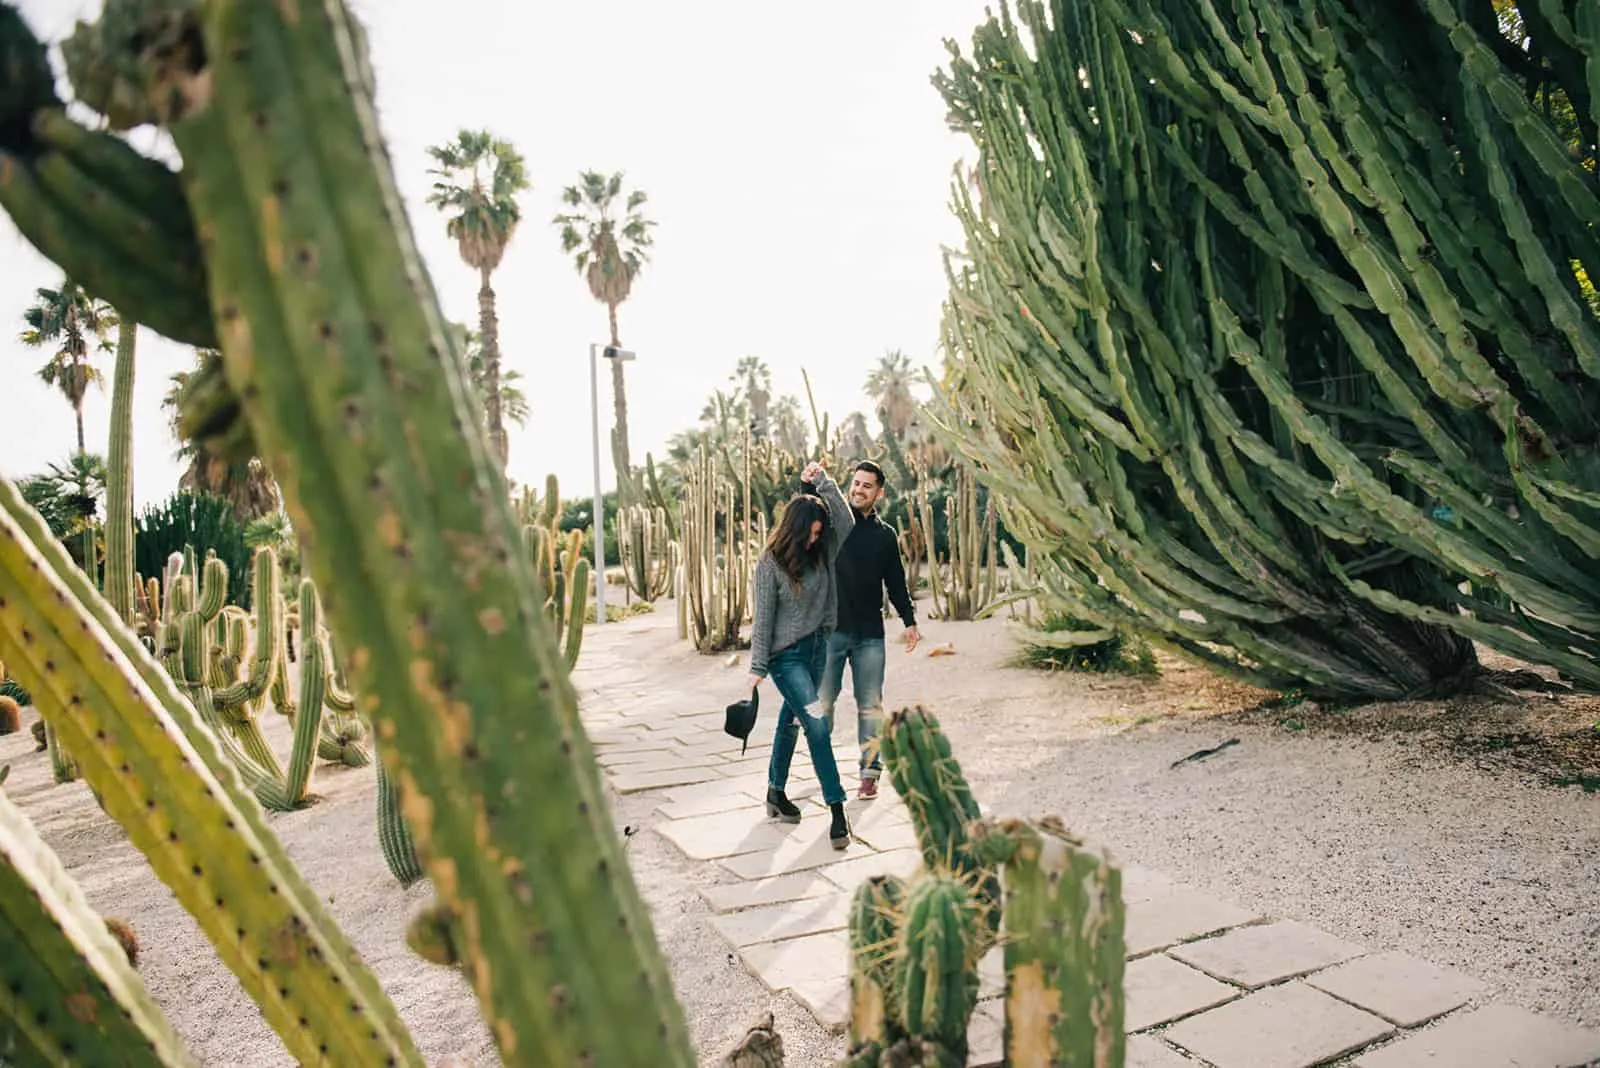 happy couple dancing among the cactus plants during daytime